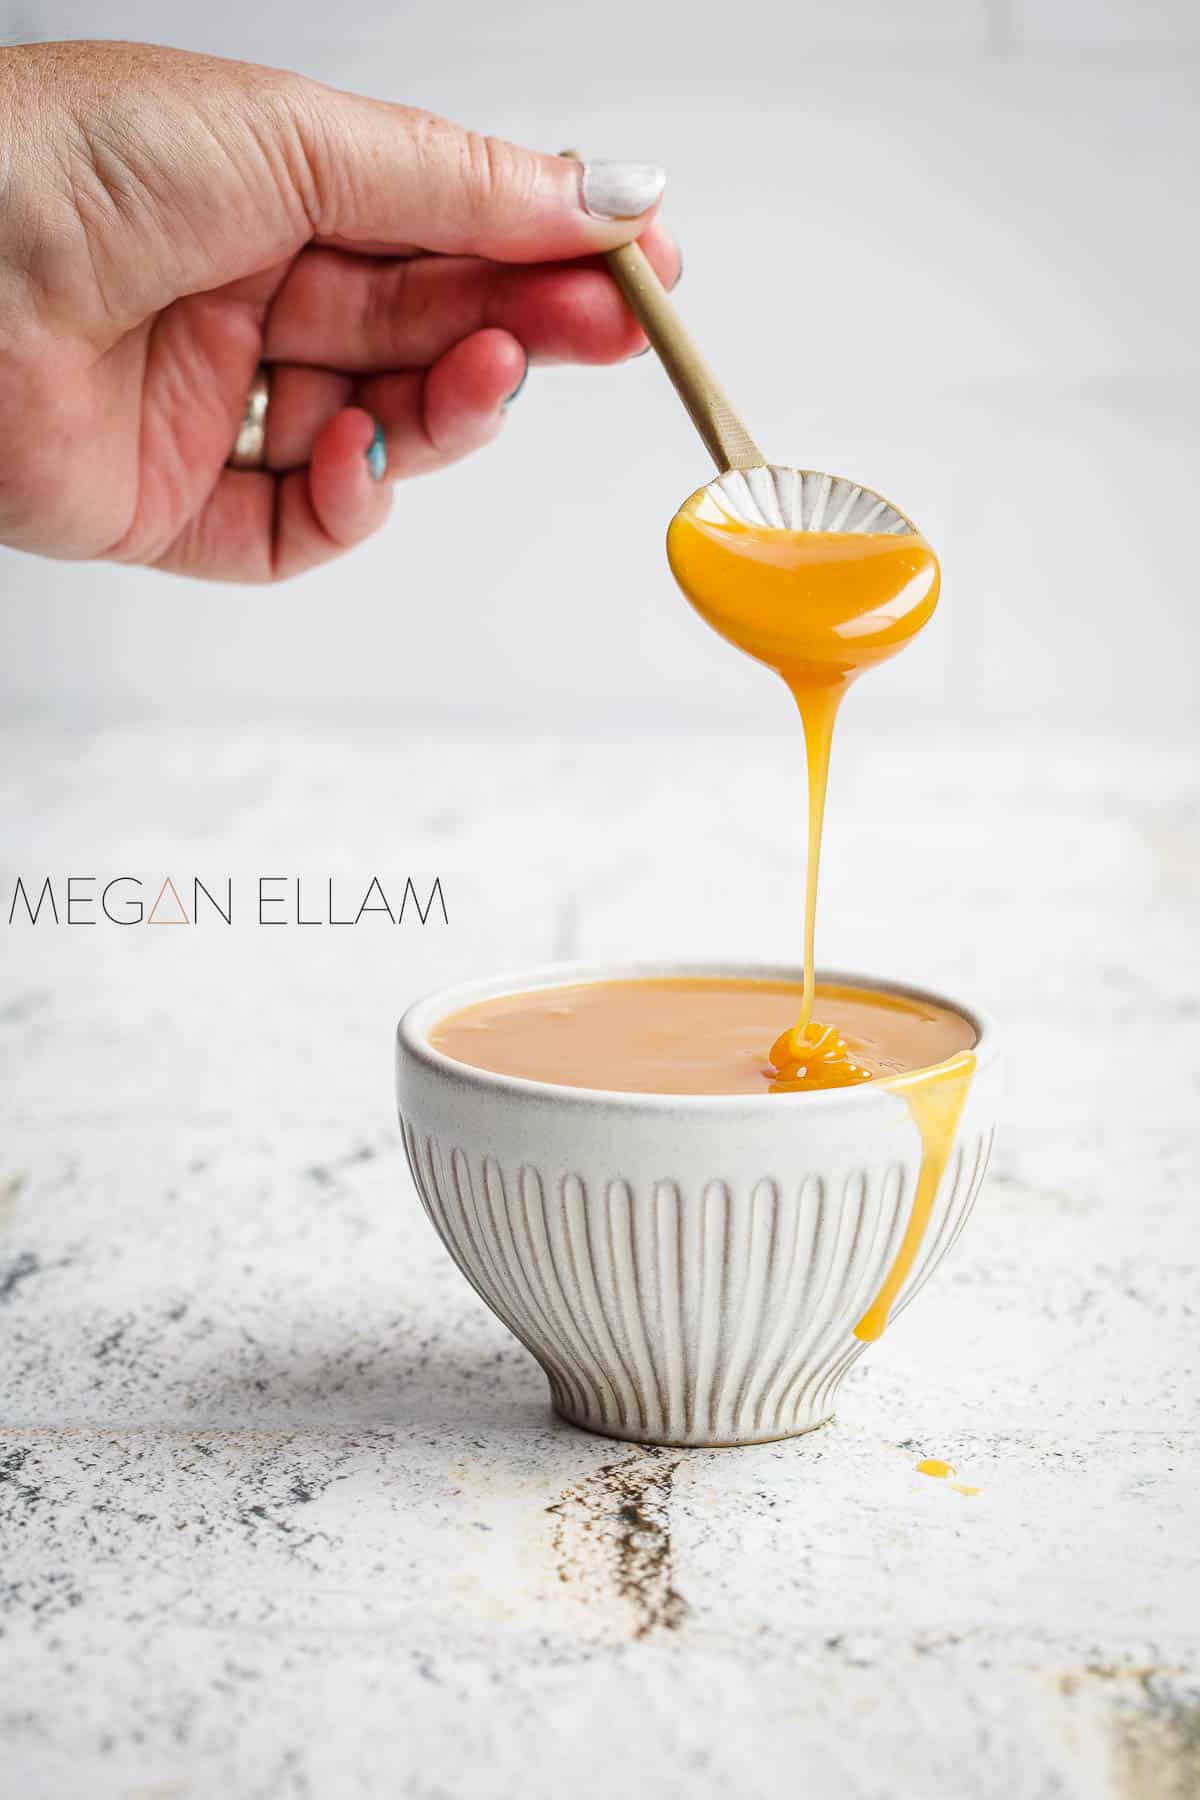 Sugar free caramel syrup being drizzled off a spoon by a womans hand.